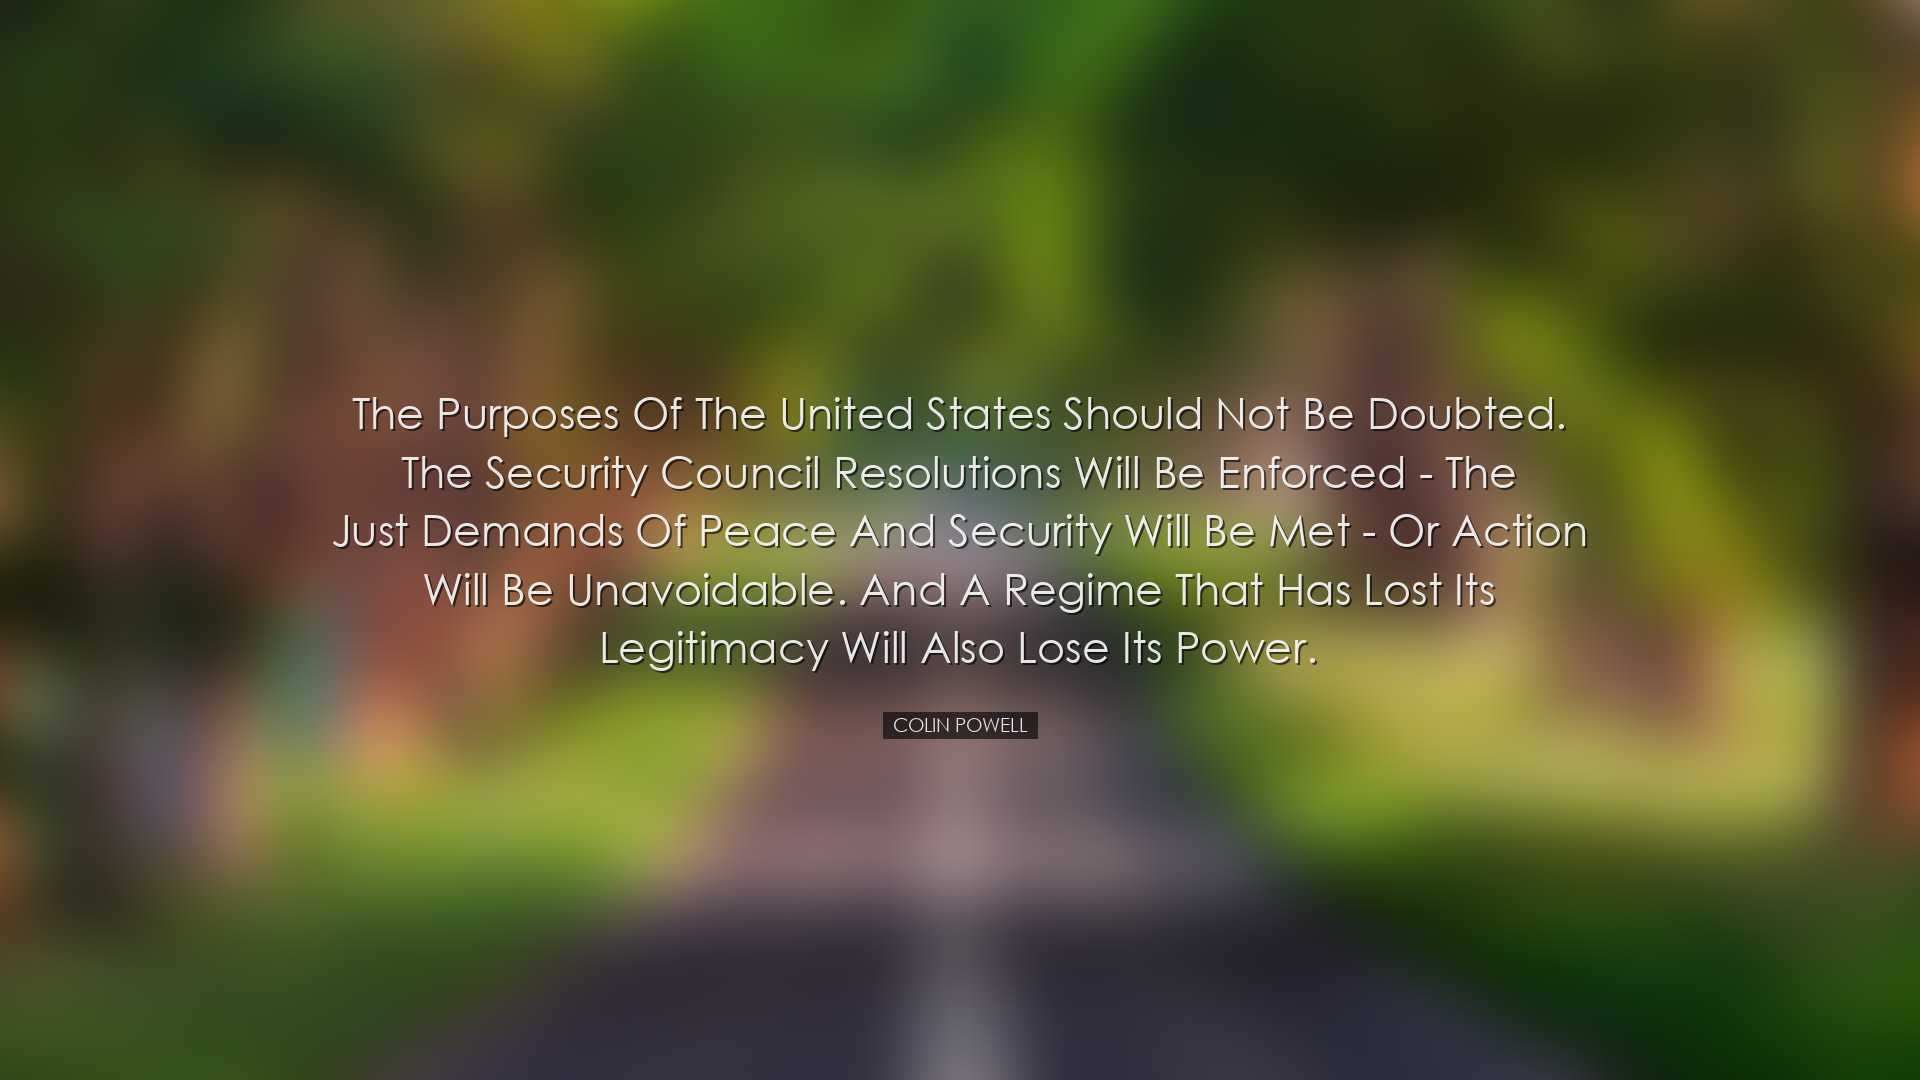 The purposes of the United States should not be doubted. The Secur